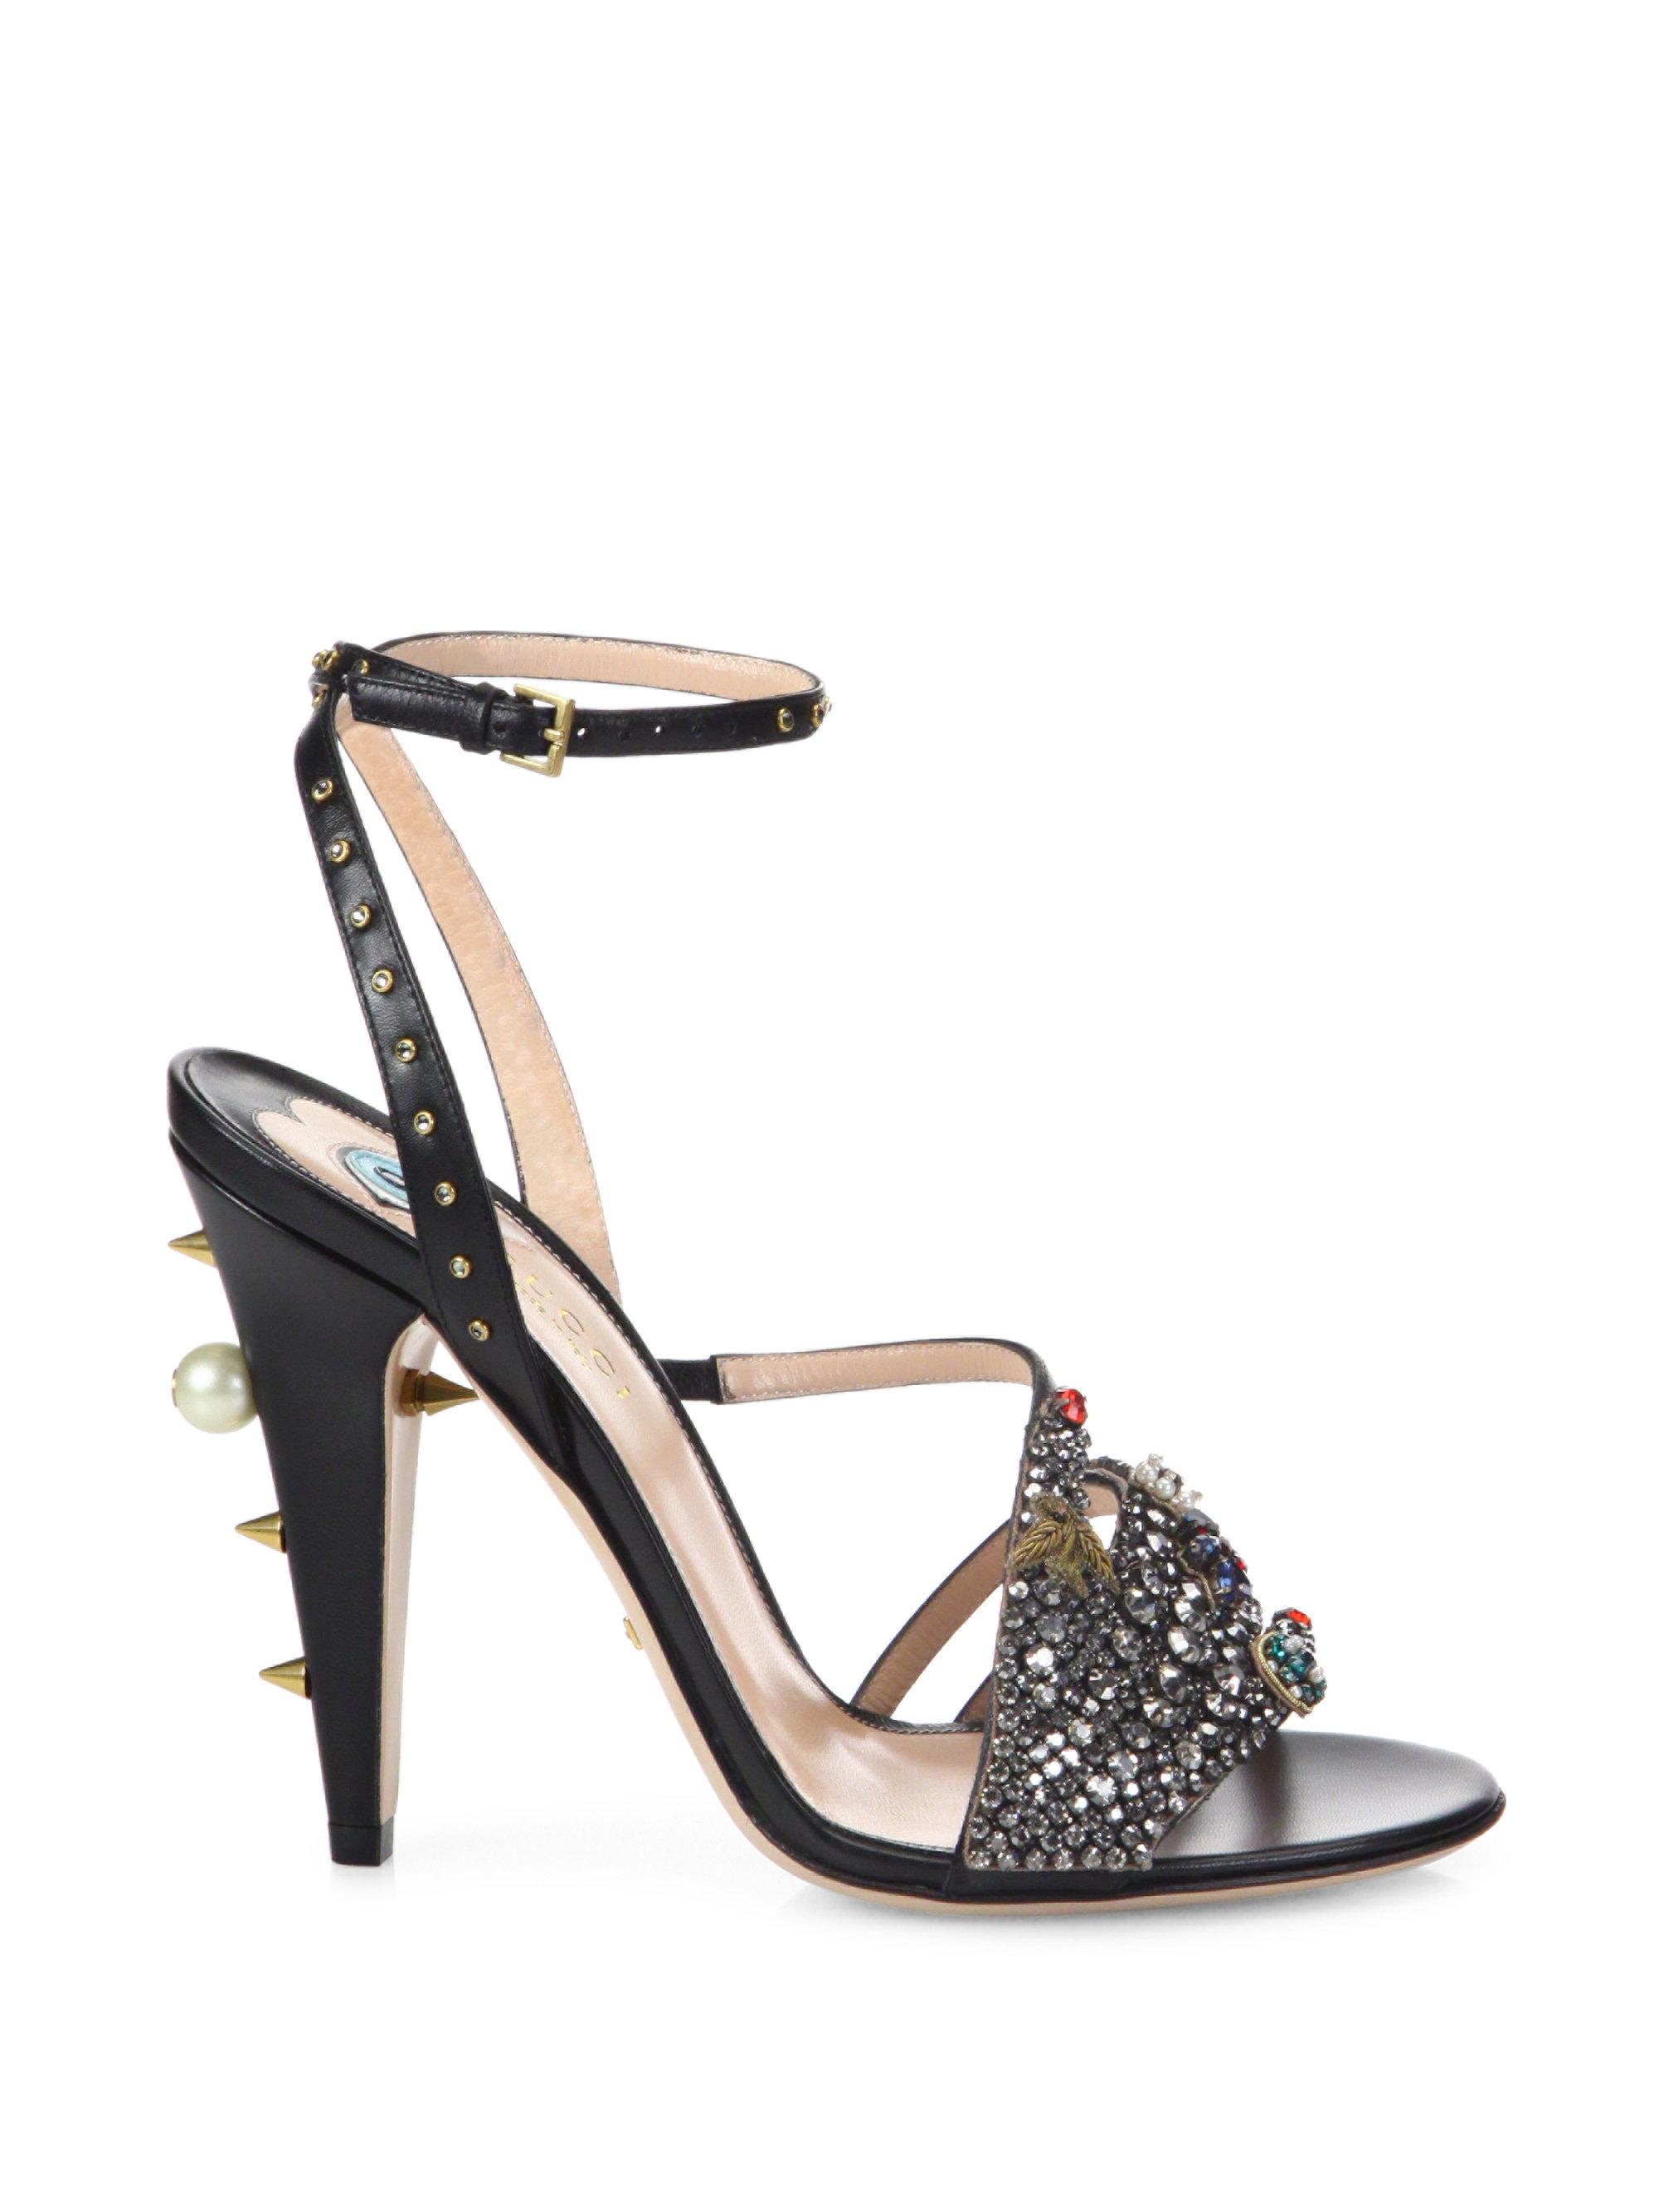 Lyst - Gucci Wangy Crystal-encrusted Leather Sandals in Black